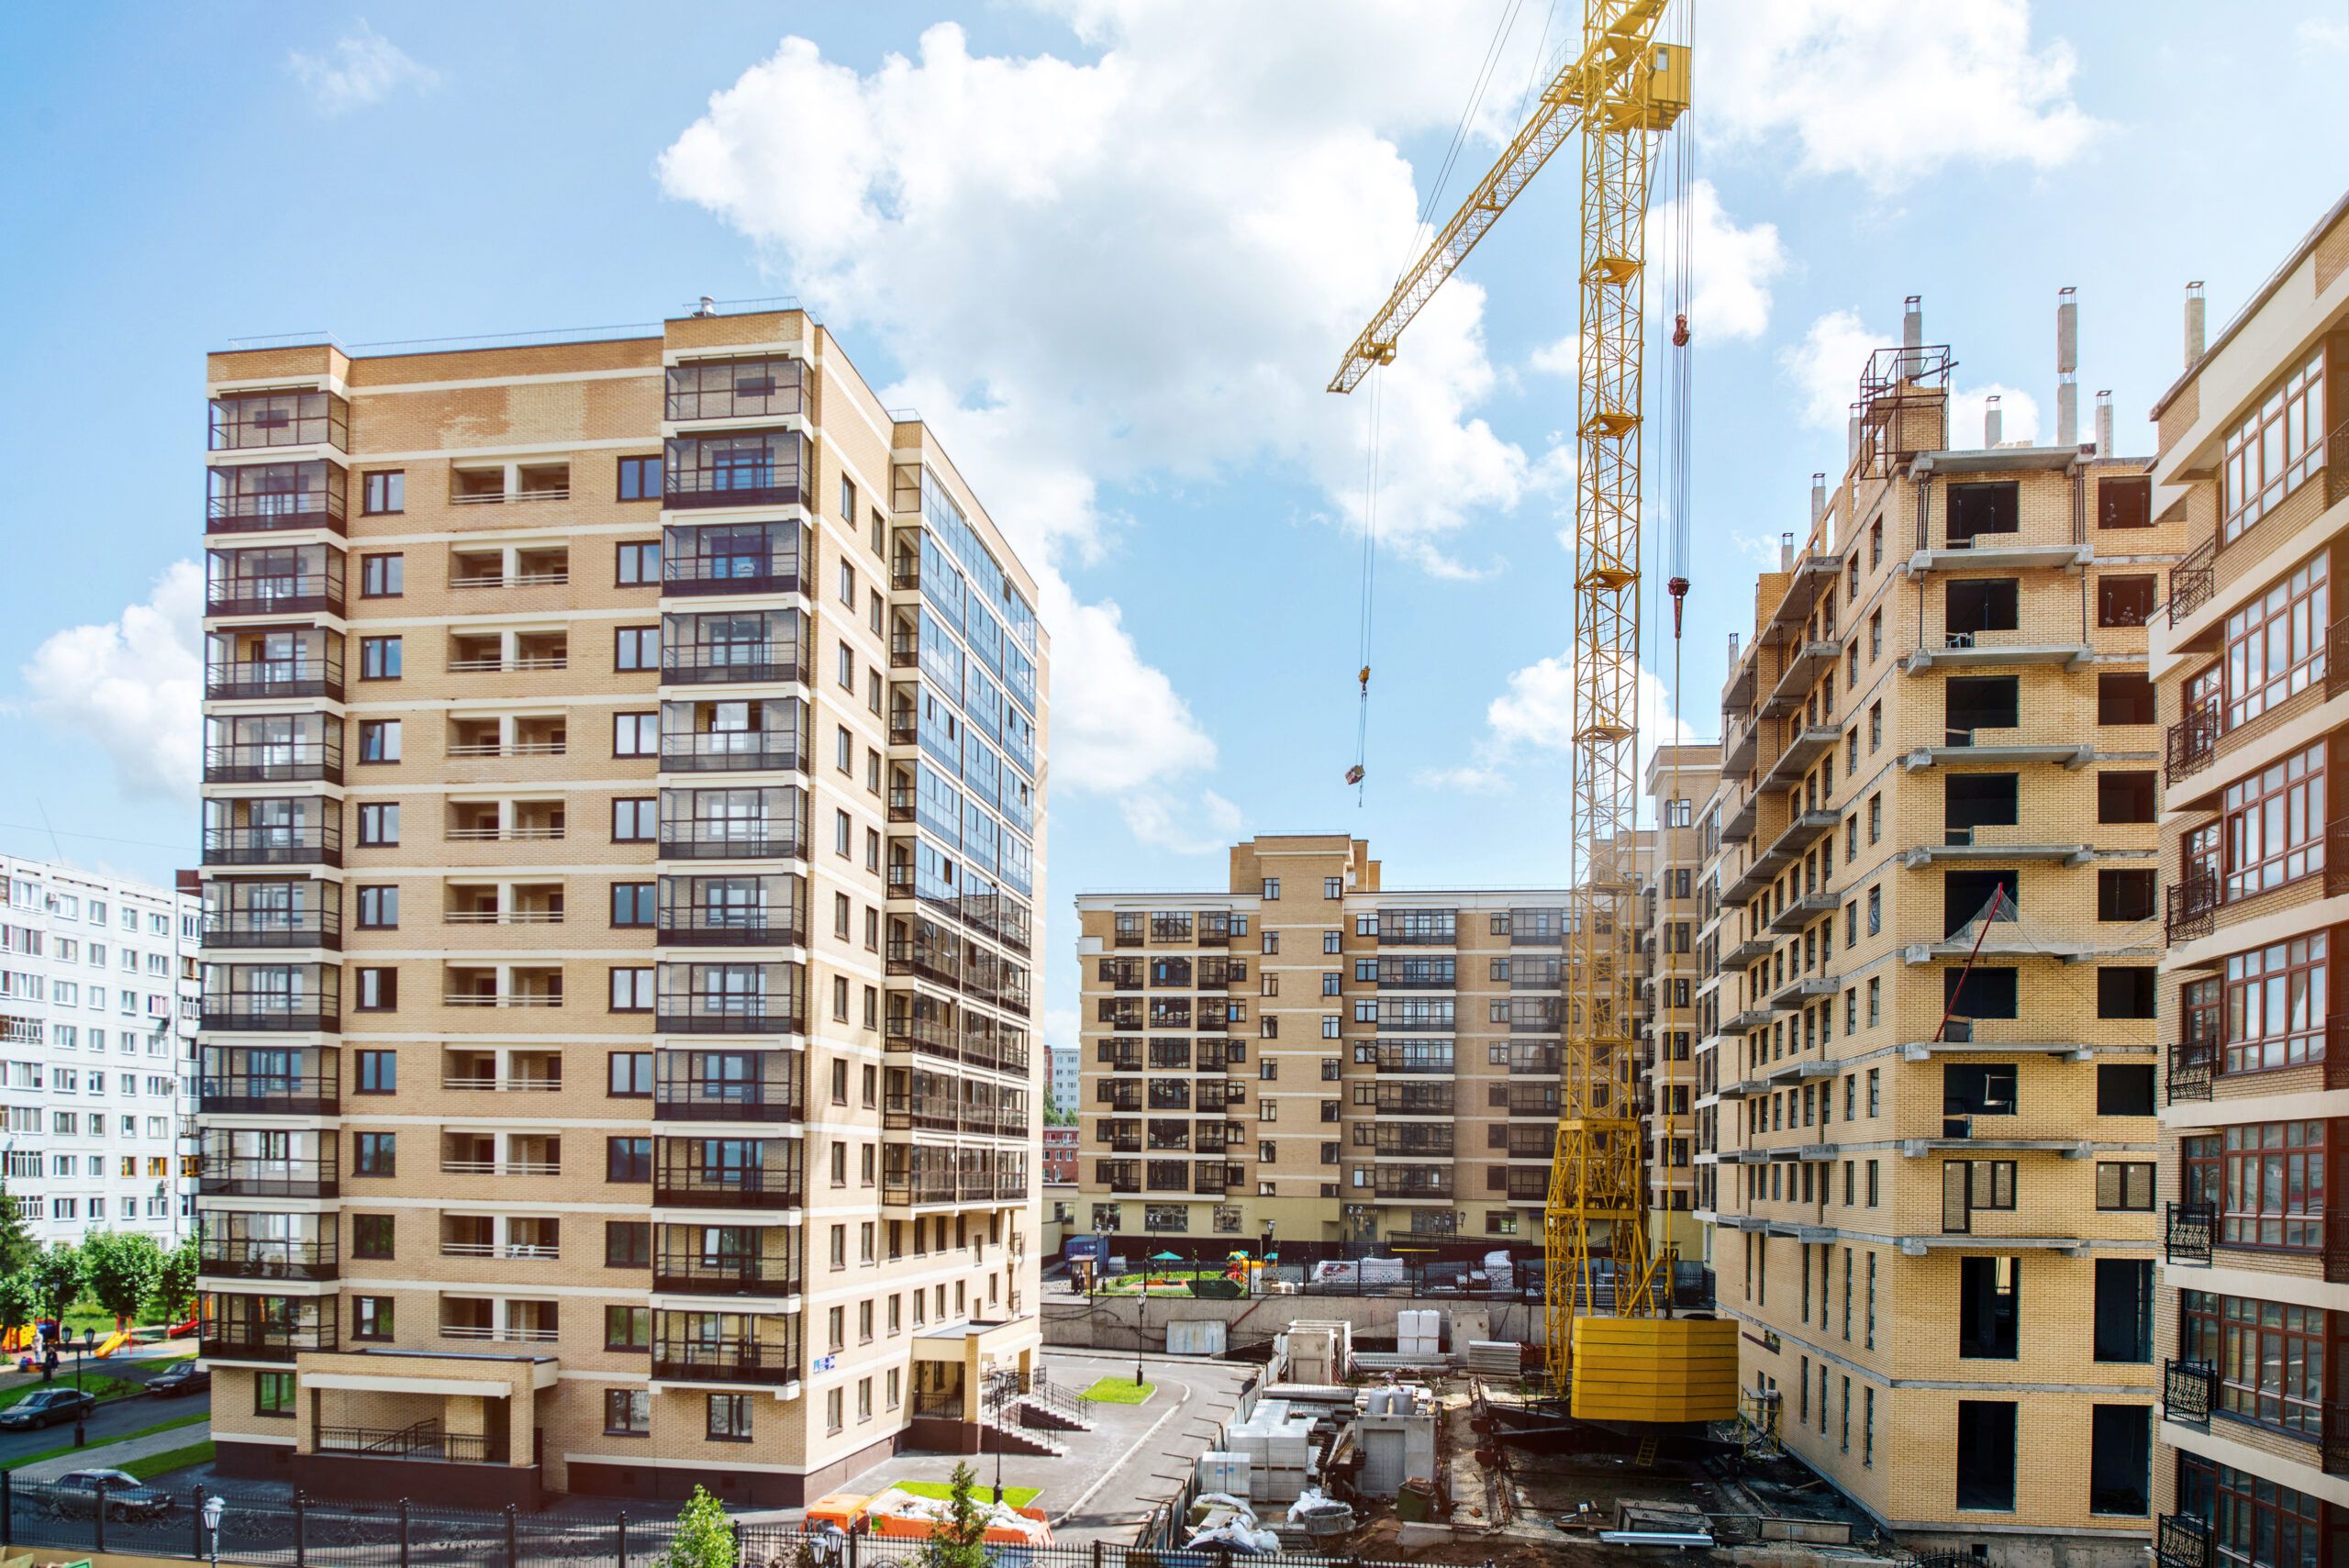 A stock image of a new building under construction